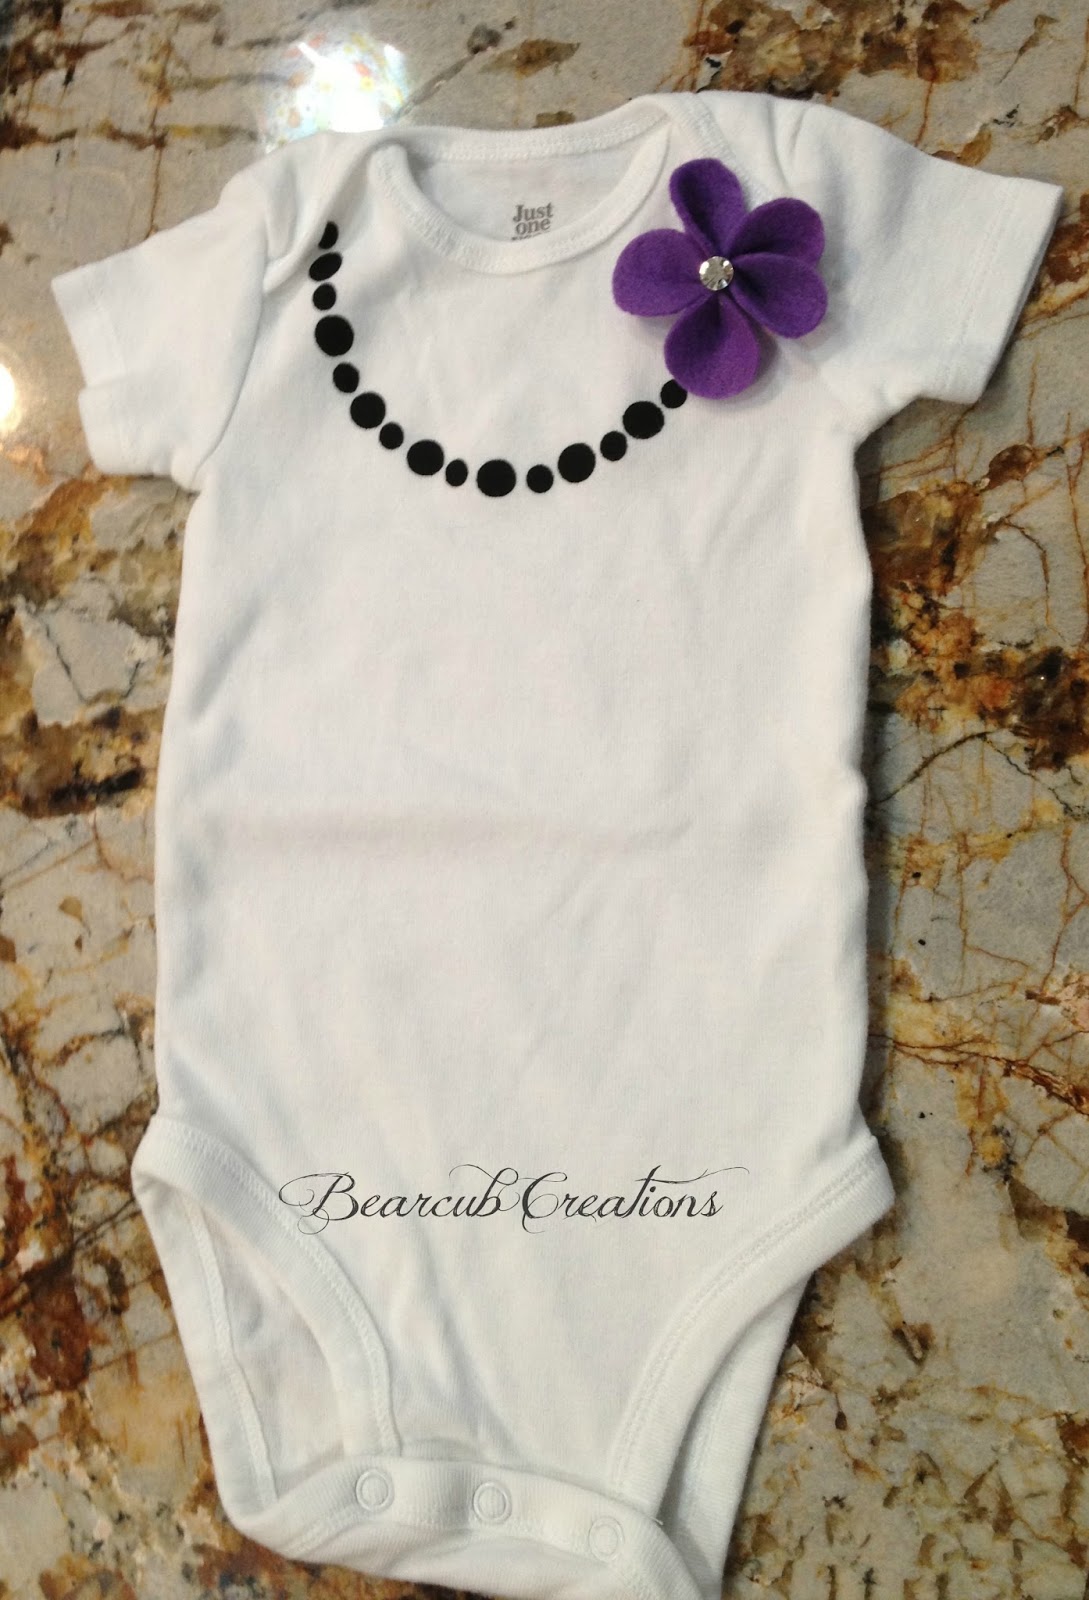 Bearcub Creations: Necklace Onsie Using Silhouette Designer Software